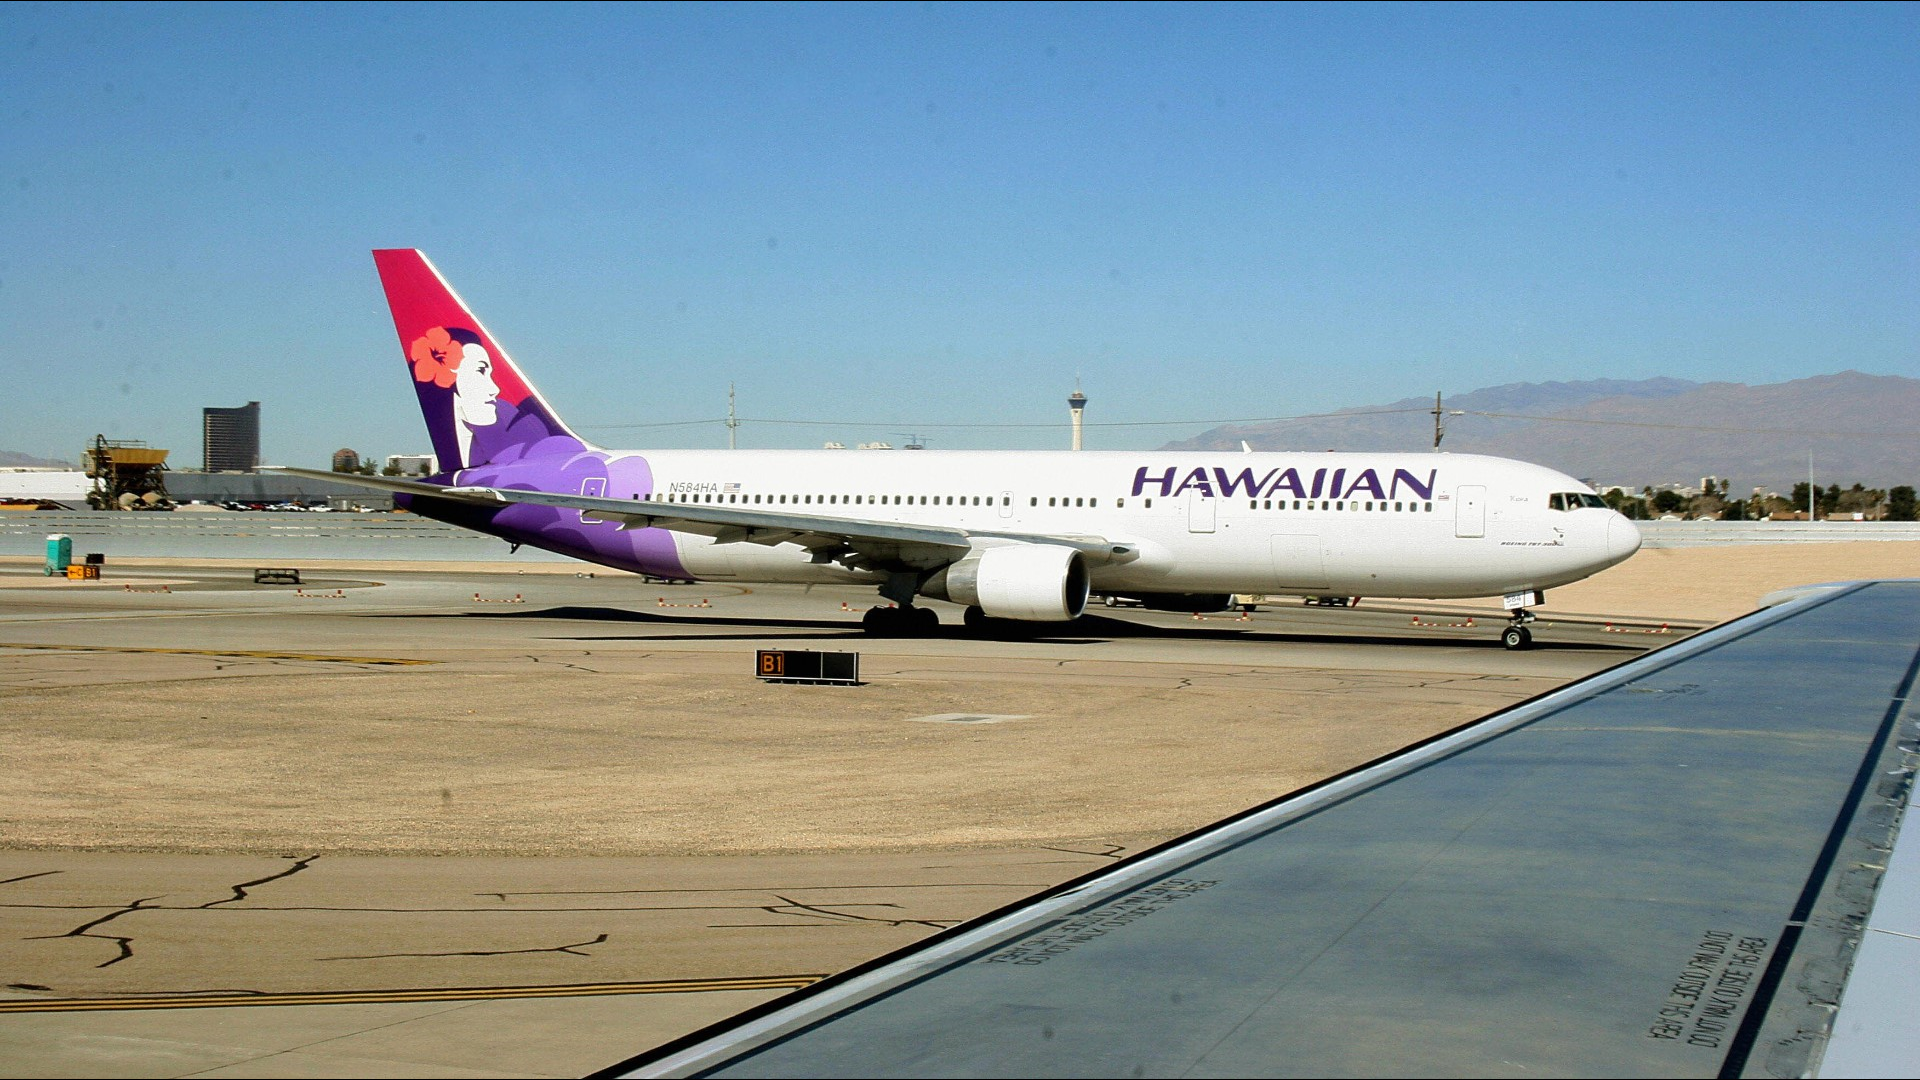 Nearly a year after making the major announcement, Hawaiian airlines will begin daily nonstop flights between Sacramento and Maui.